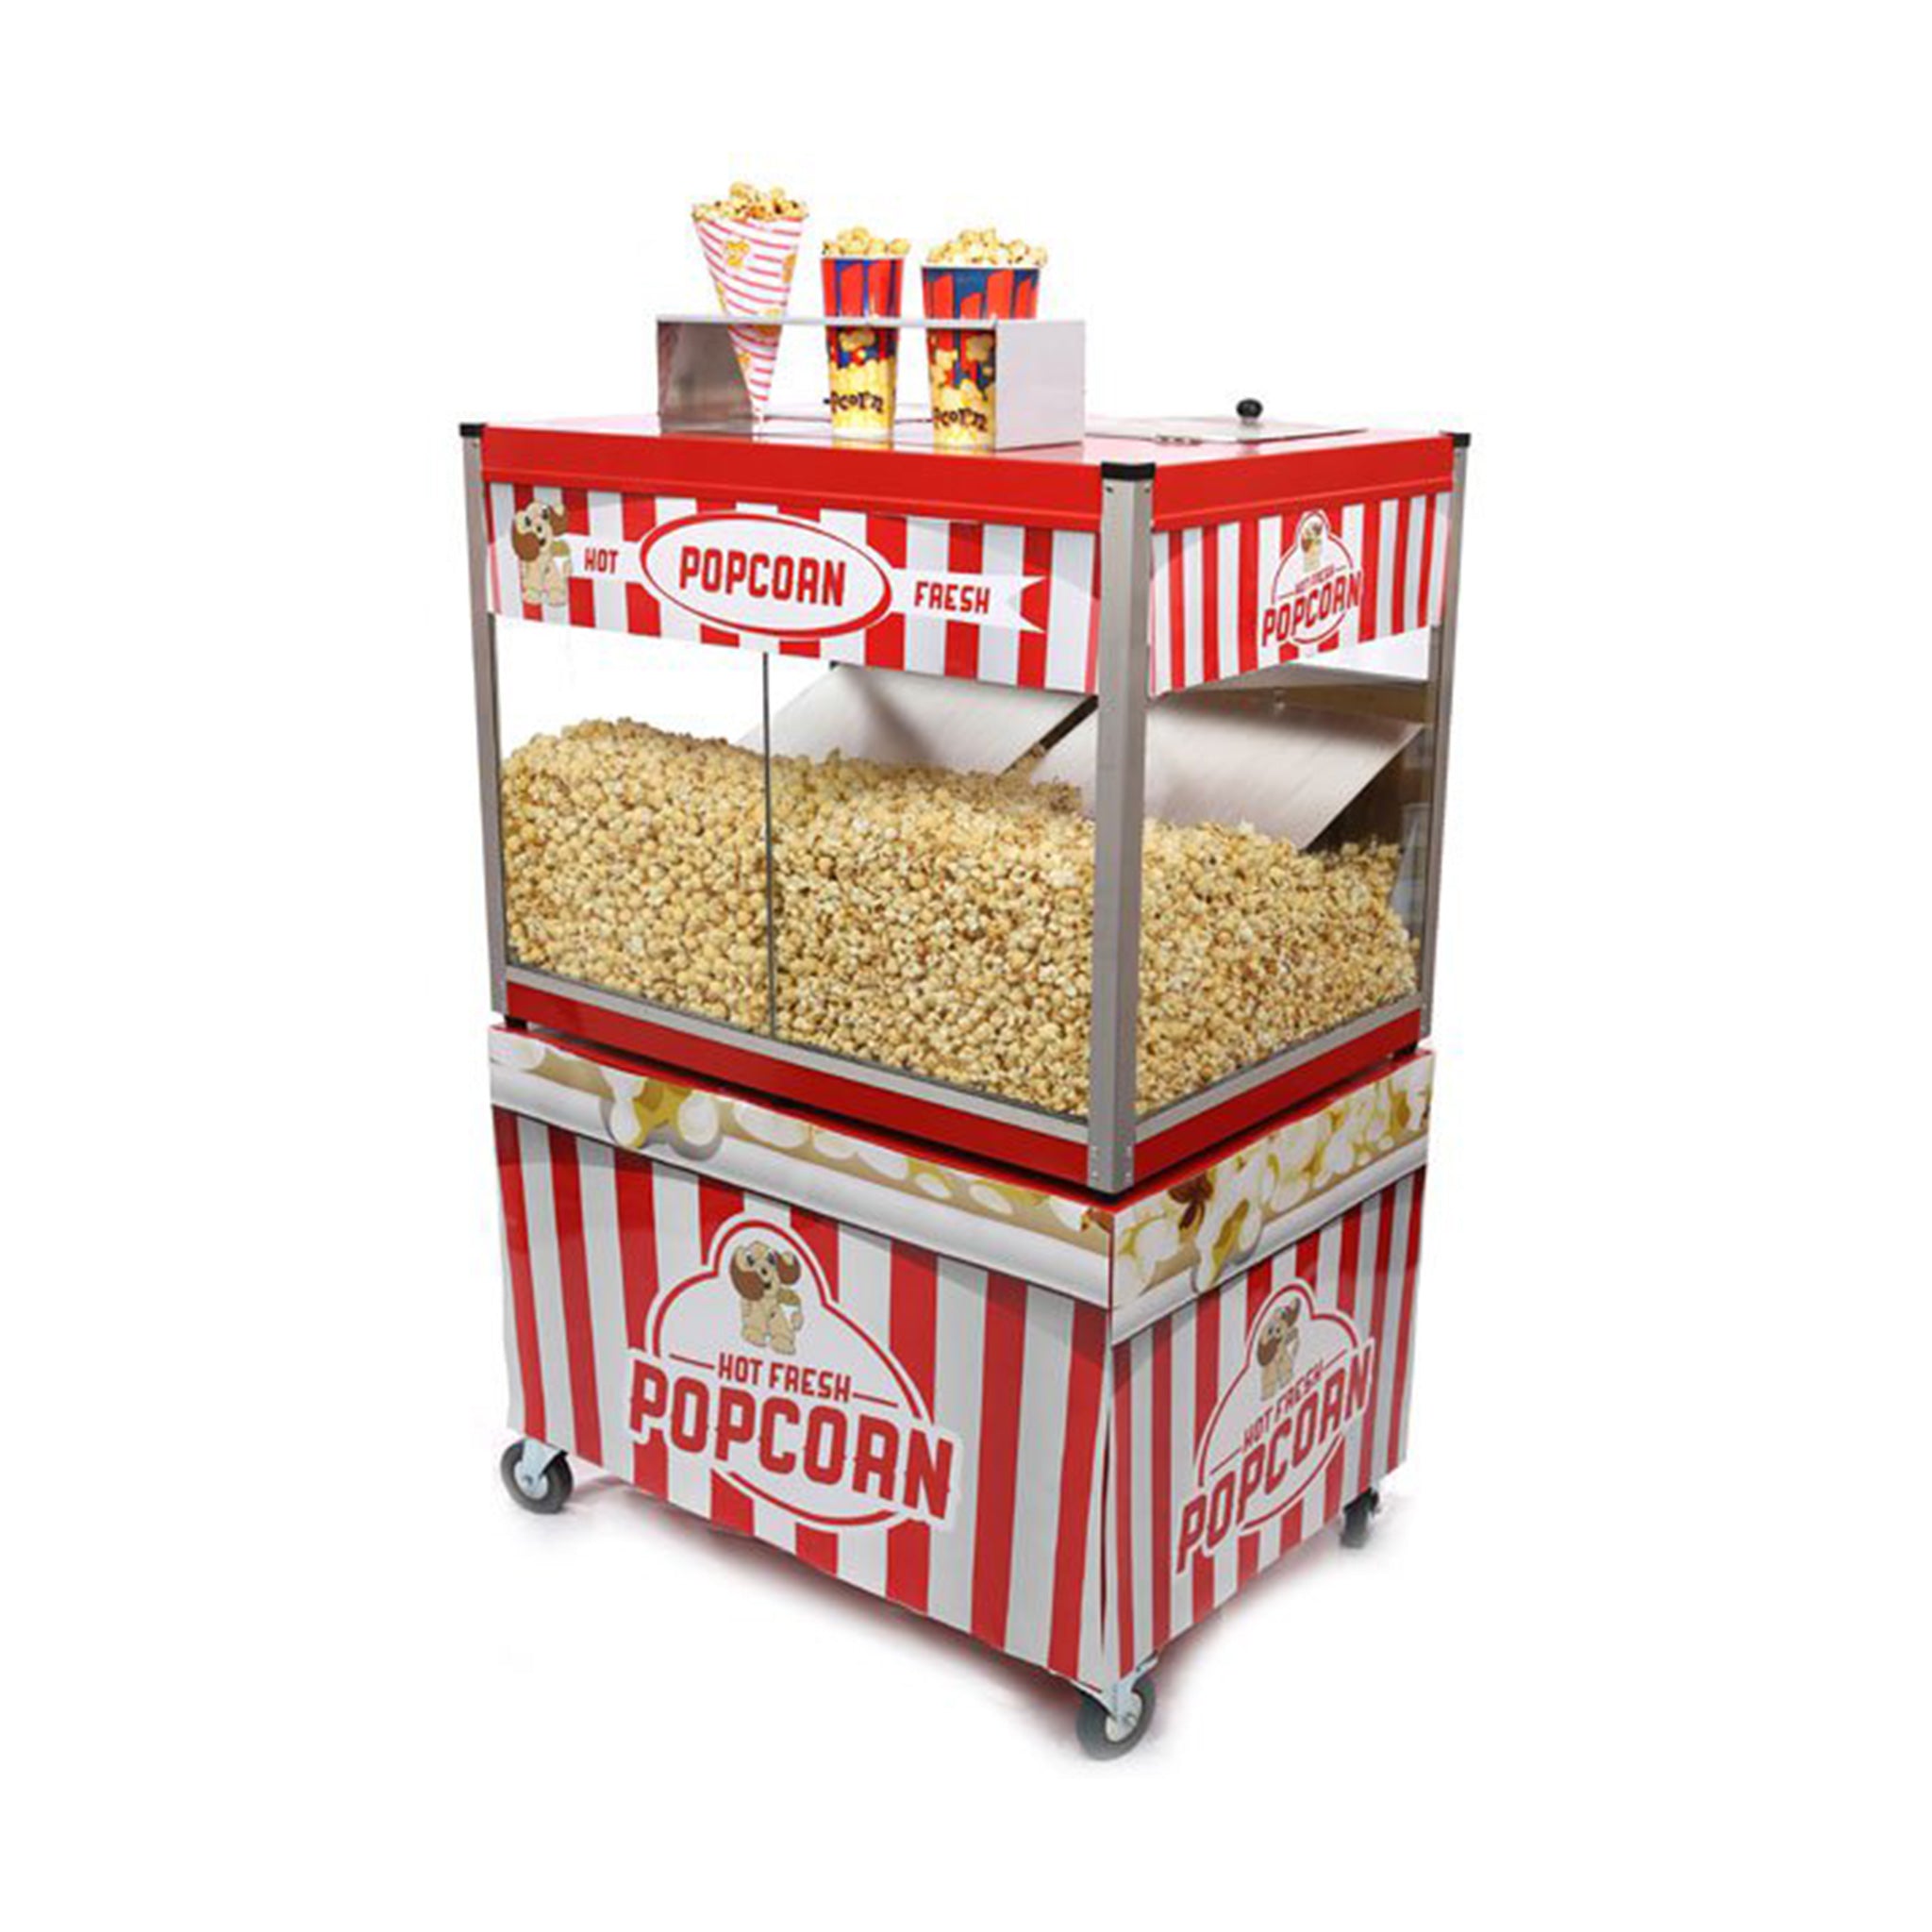 Large Double popcorn warmer with Base